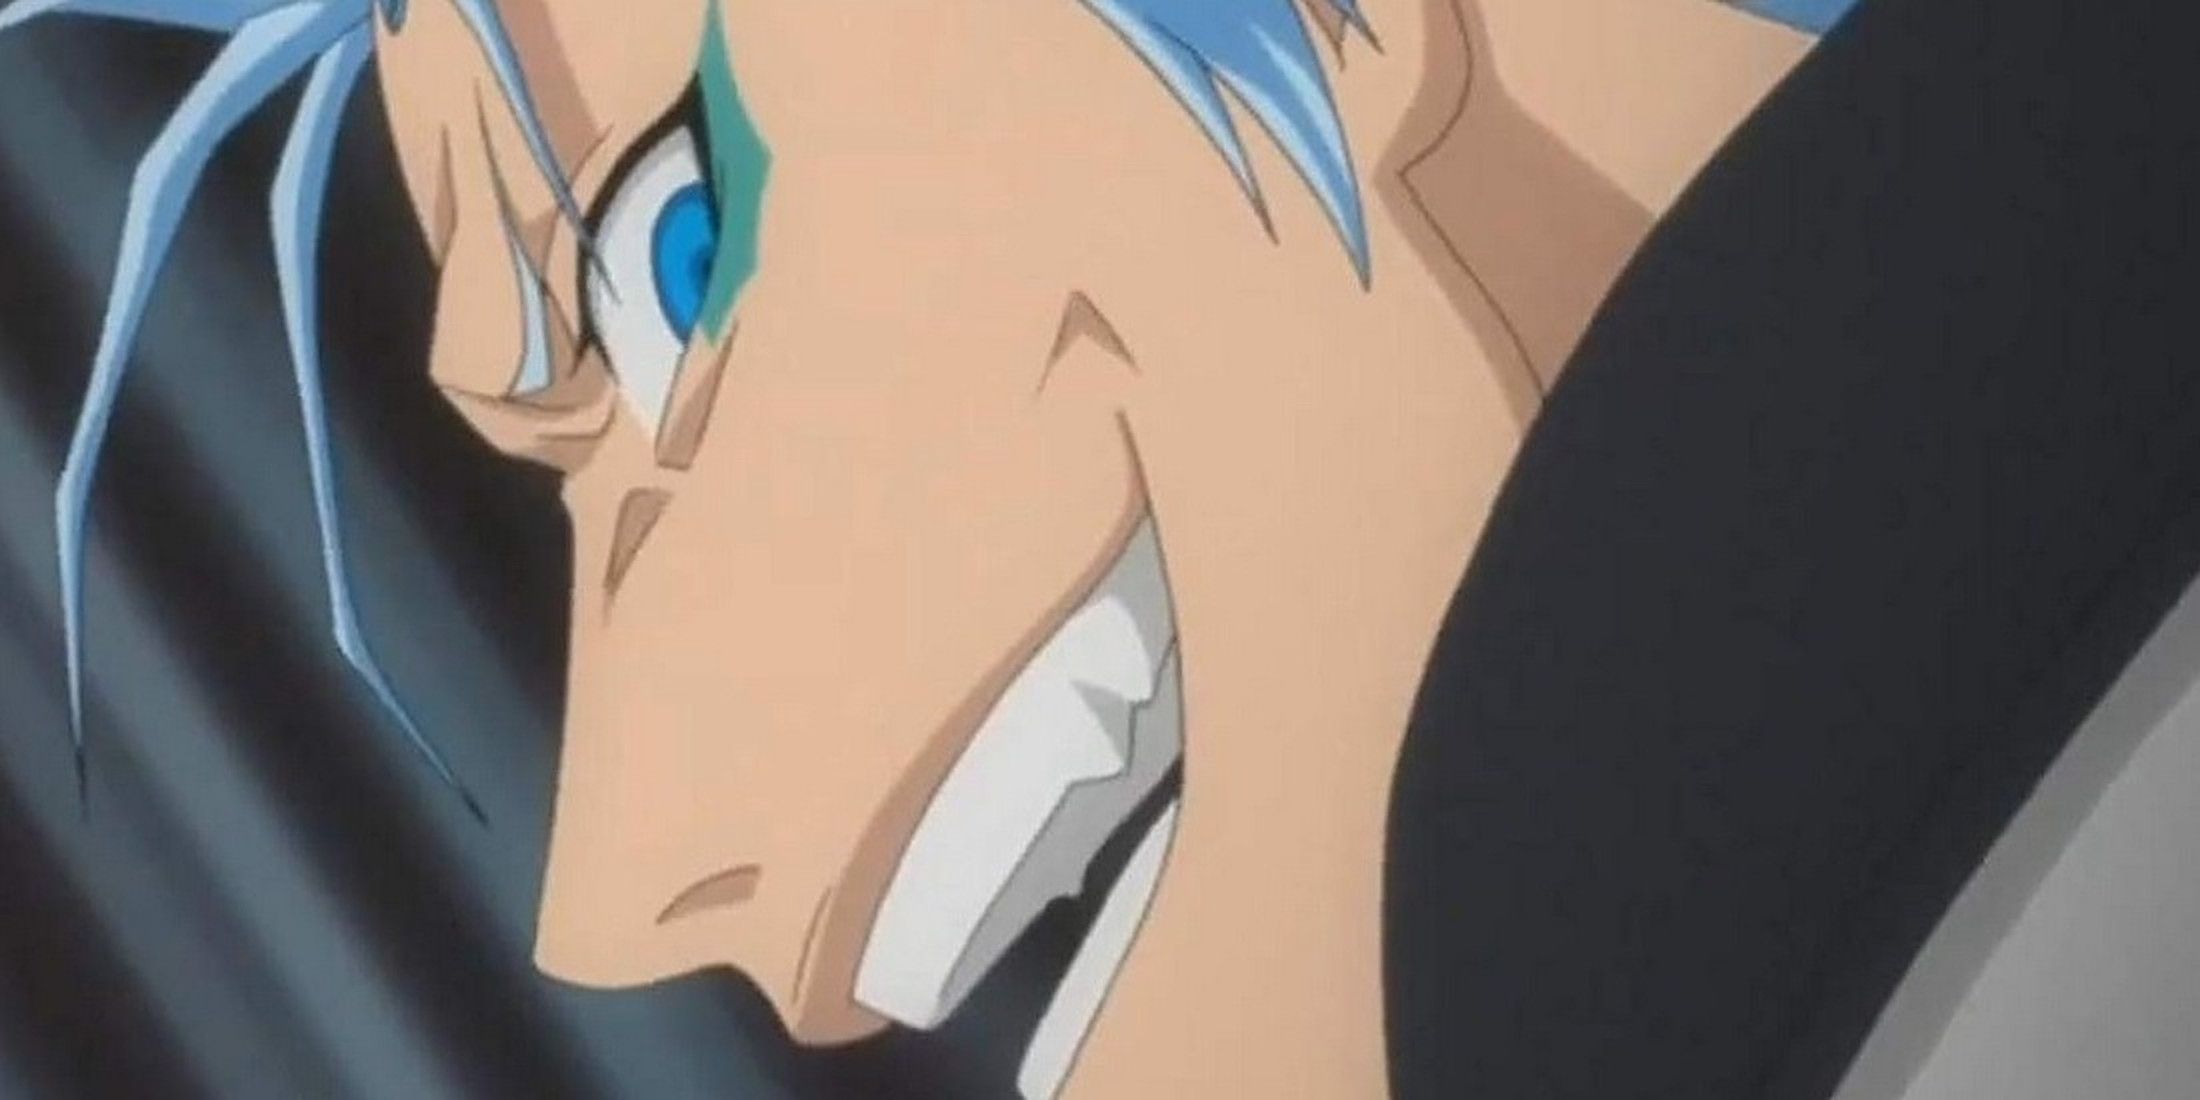 grimmjow is looking over his shoulder while smiling